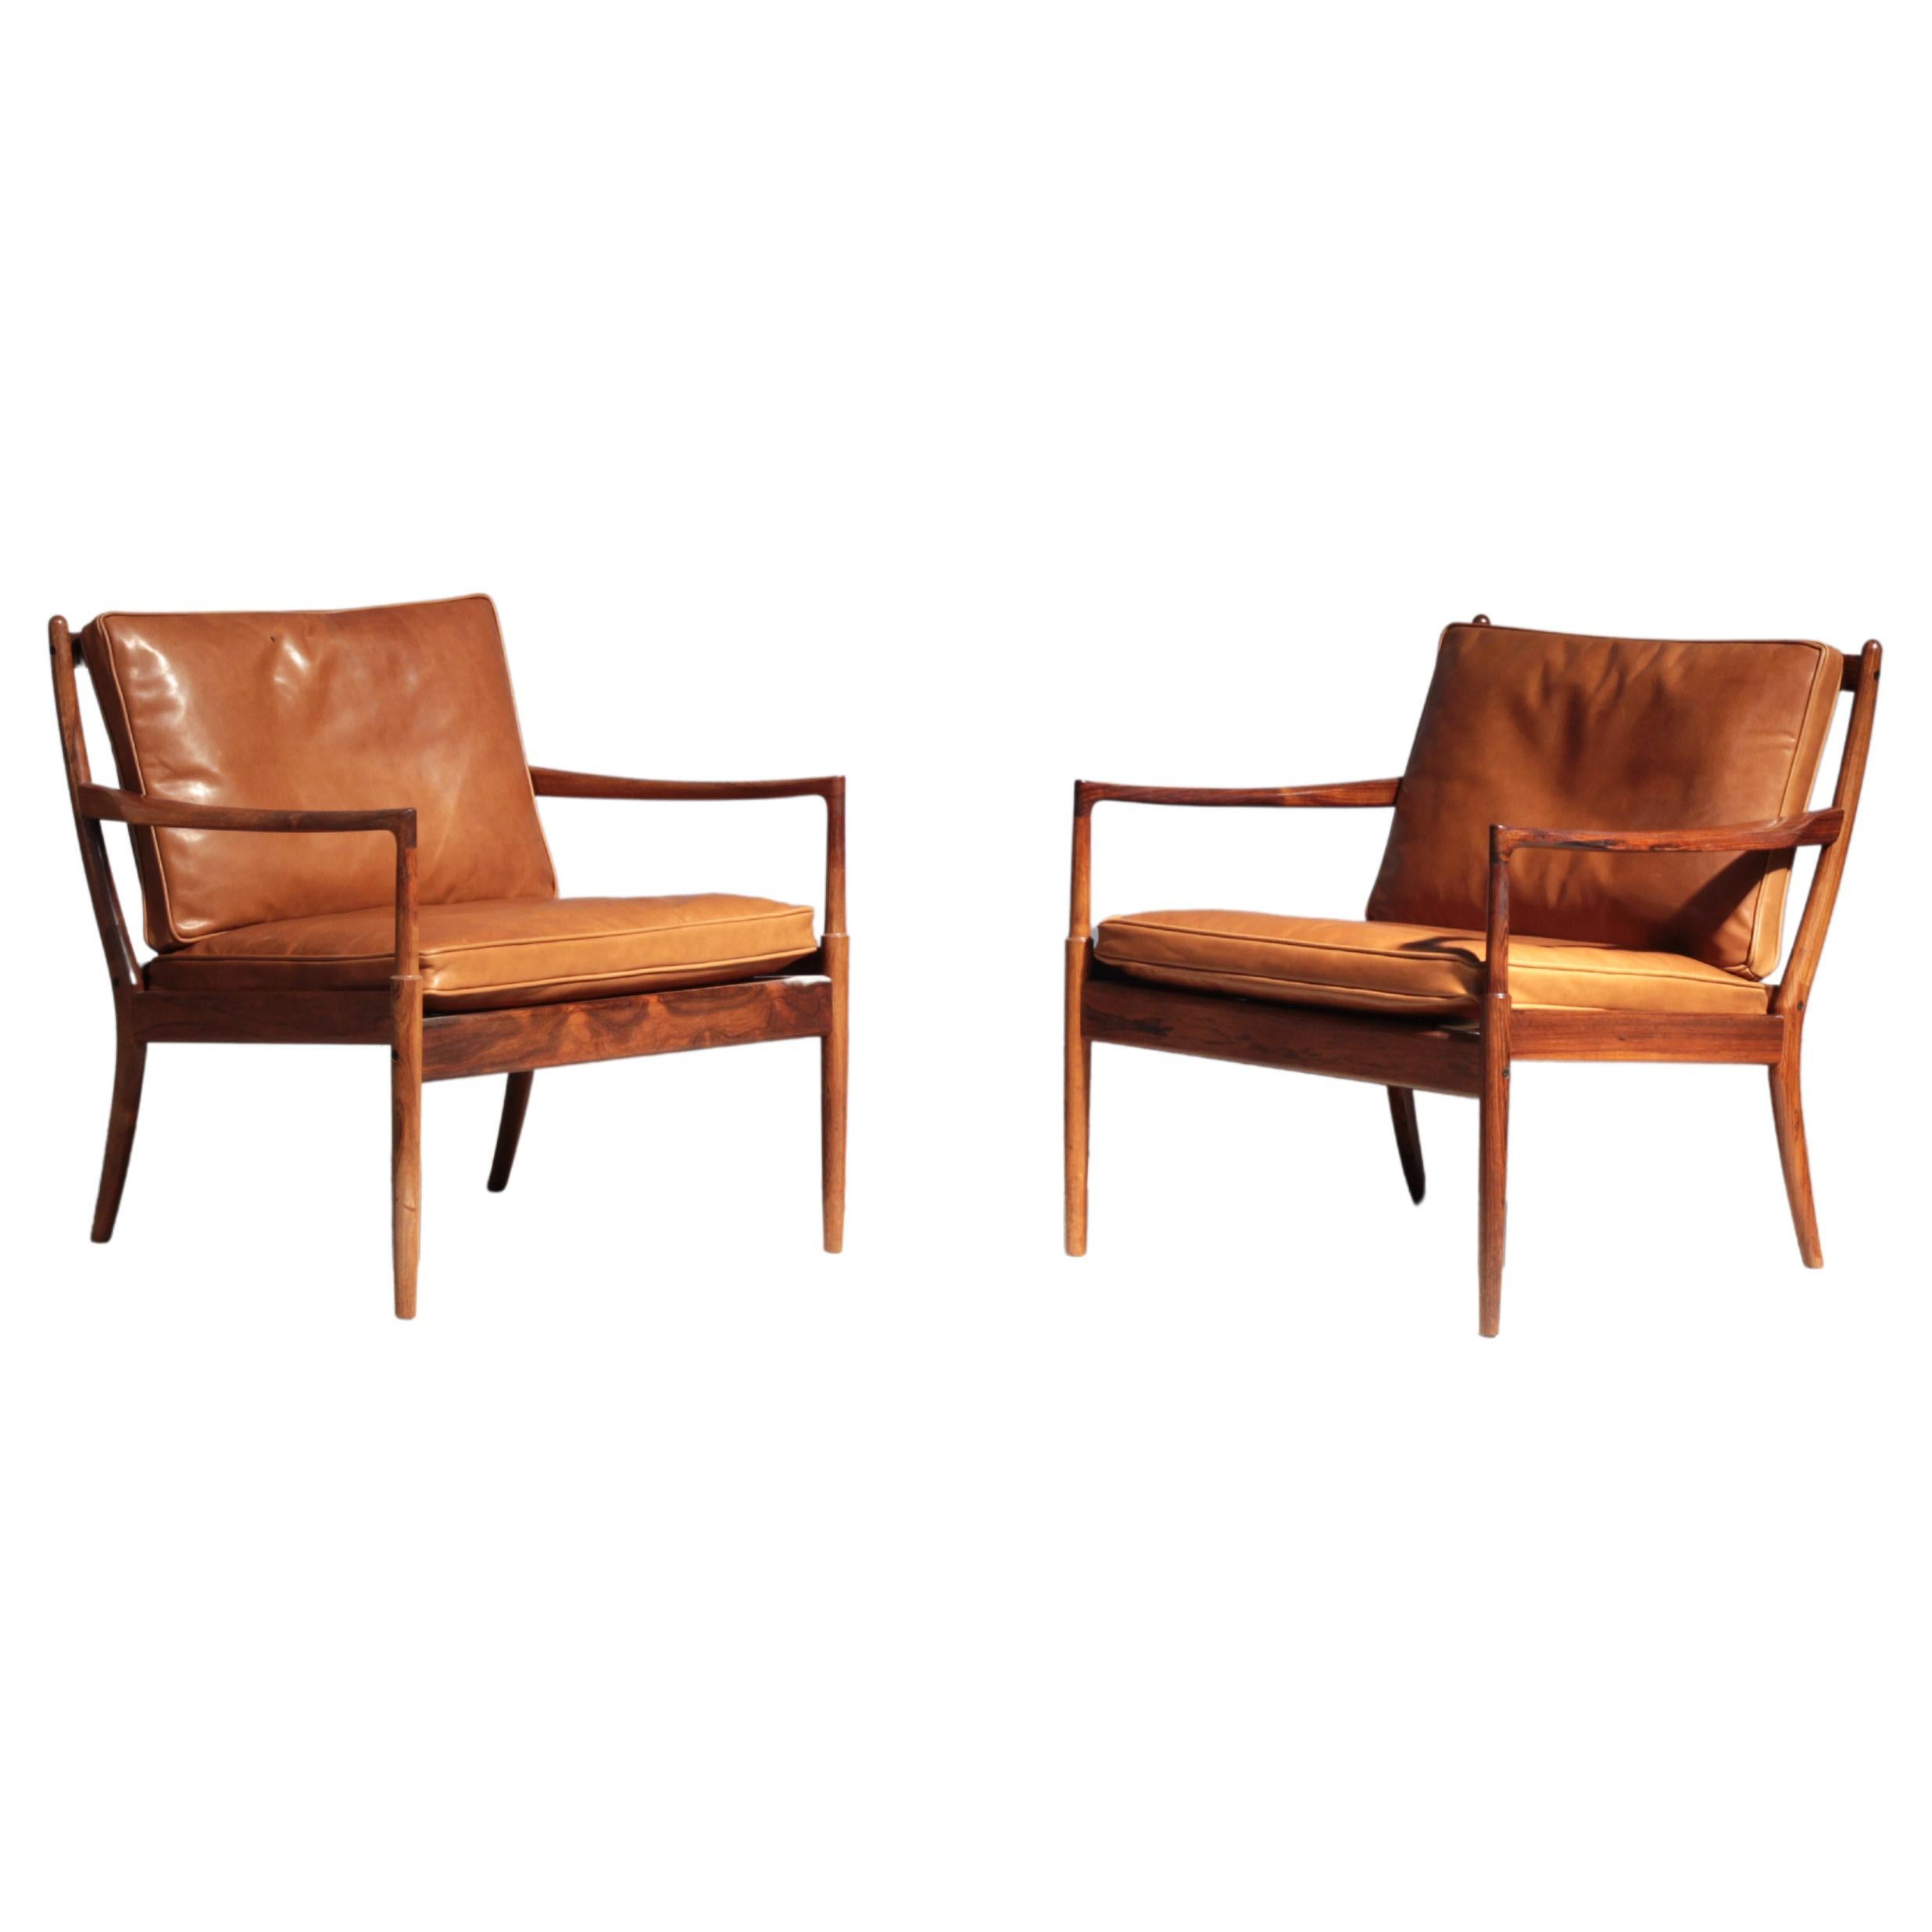 Beautiful pair of lounge chairs designed by the Danish designer Ib Kofod-Larsen in 1958 for the Swedish furniture manufacturer OPE Mobler, Sweden. Both chairs are made out of rosewood and leather cushions in brown-cognac. Both are in excellent